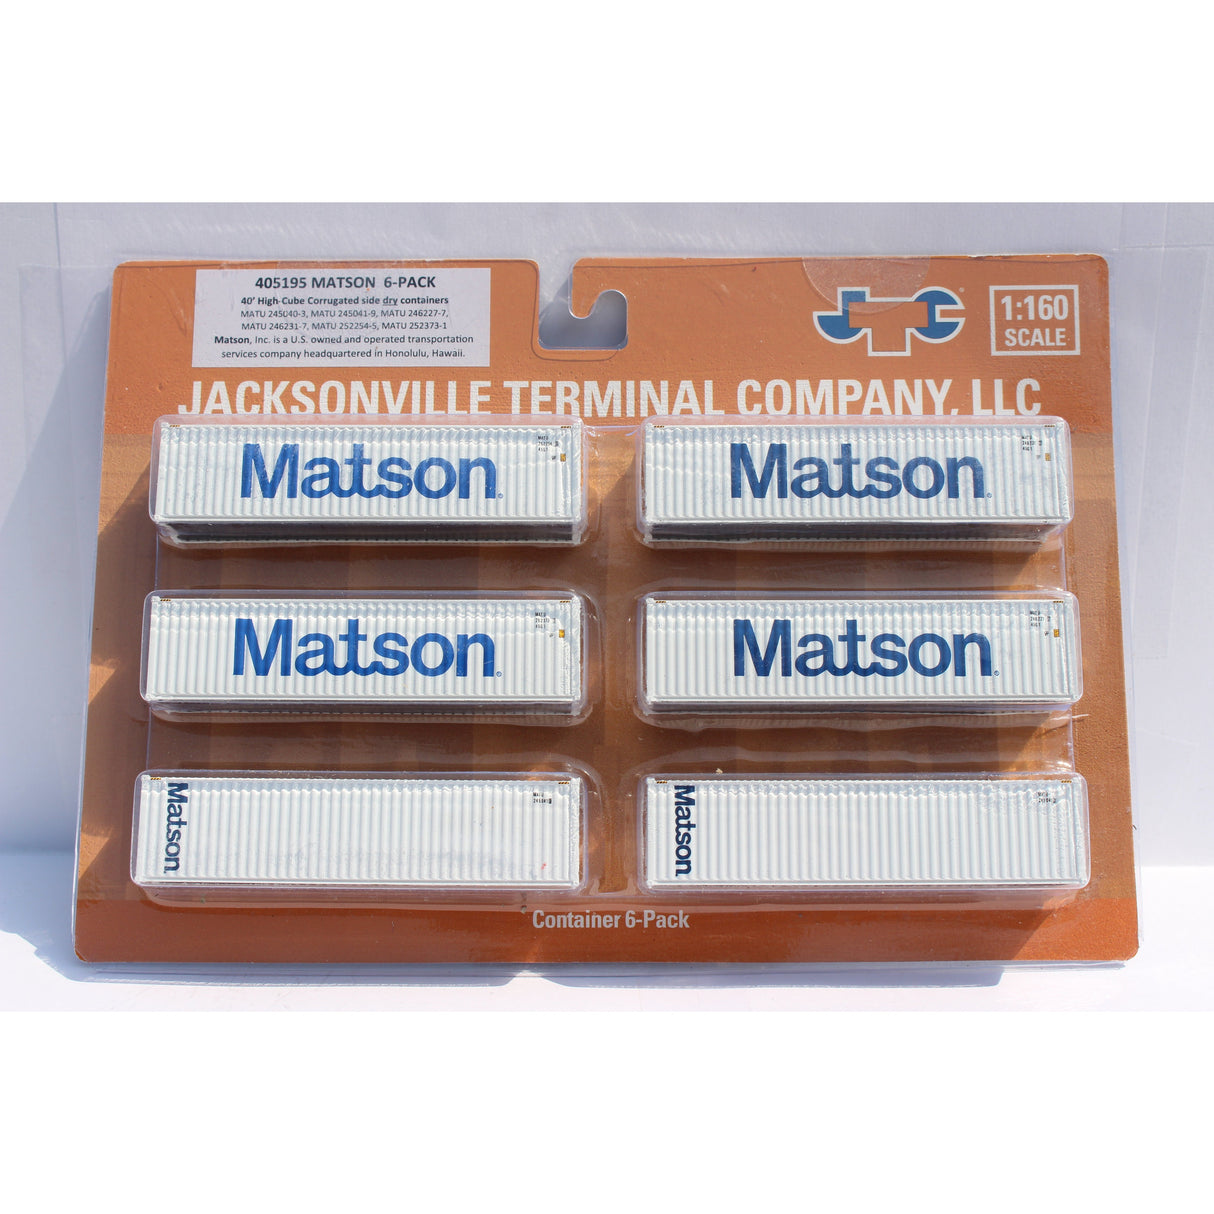 Jacksonville Terminal Company N Matson 40' High Cube Container 6pk